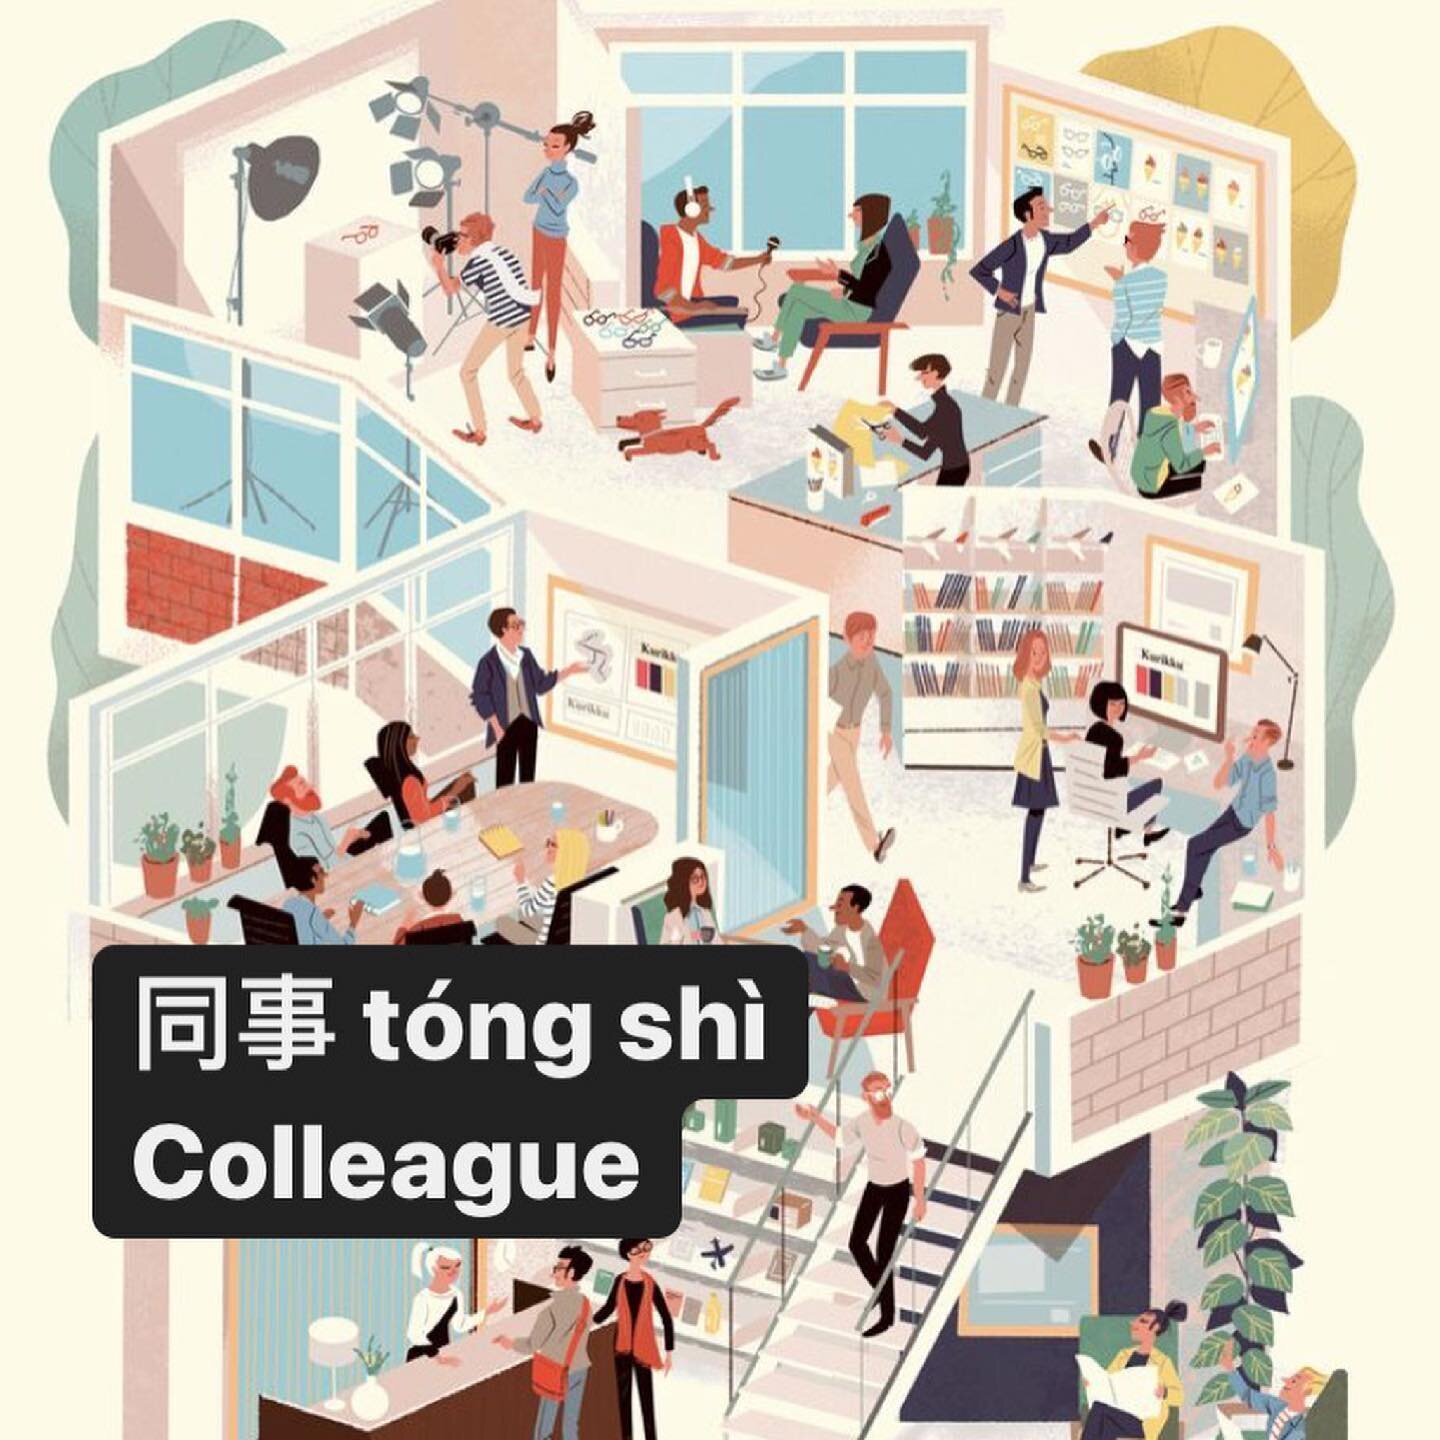 HSK vocabulary learning
同事 t&oacute;ng sh&igrave;
Colleague

e.g&nbsp;
A colleague invites us to have some food after work today.
今天下班后,有同事请我们吃饭。
jīn tiān xi&agrave; bān h&ograve;u yǒu t&oacute;ng sh&igrave; qǐng wǒ men chī f&agrave;n。

Are you Linda